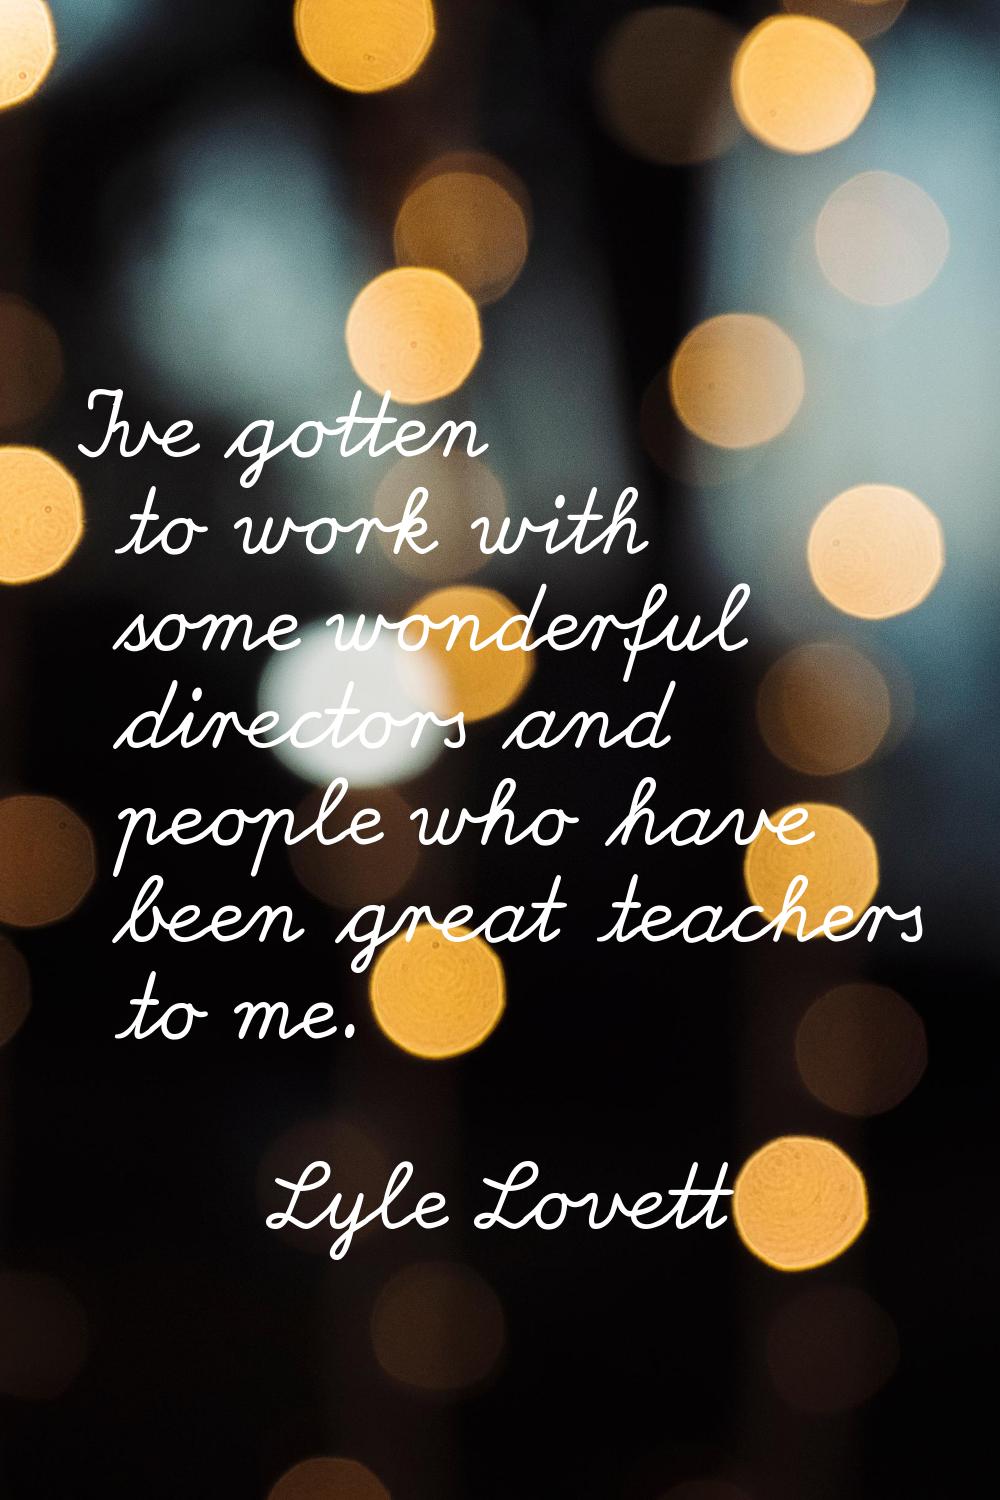 I've gotten to work with some wonderful directors and people who have been great teachers to me.